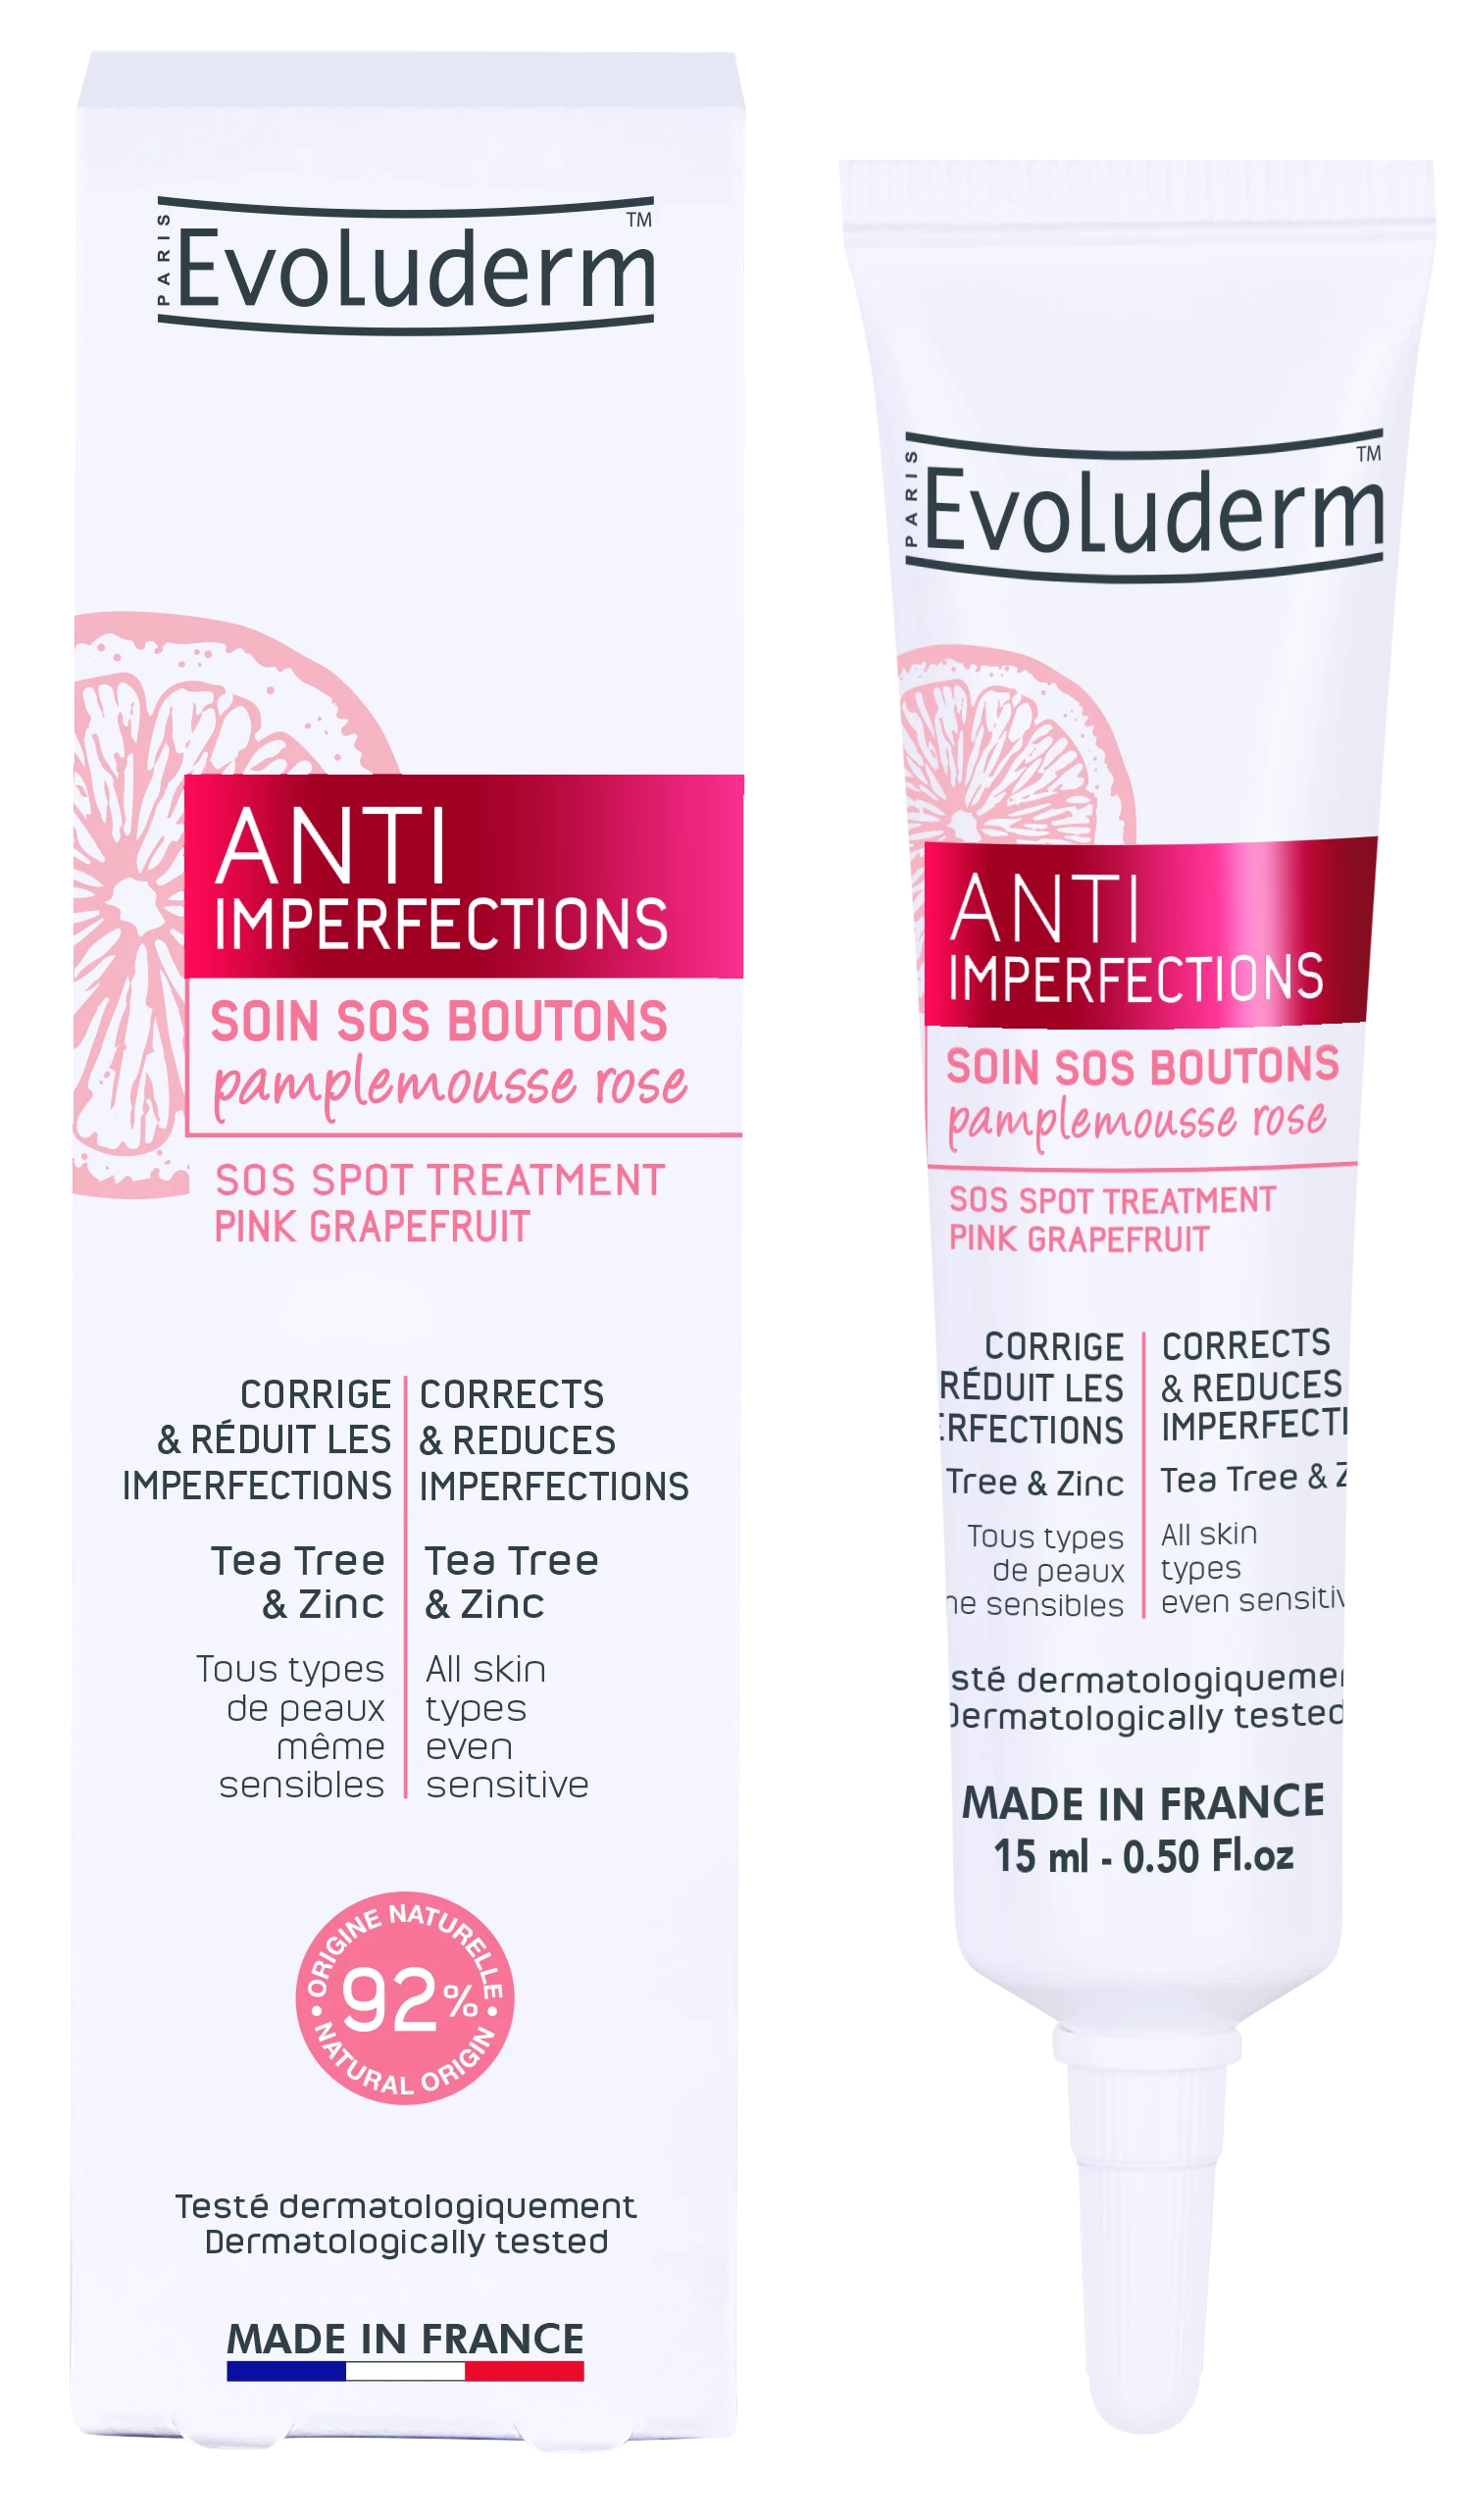 Soin Sos Boutons Anti-imperfections 15ml - Evoluderm